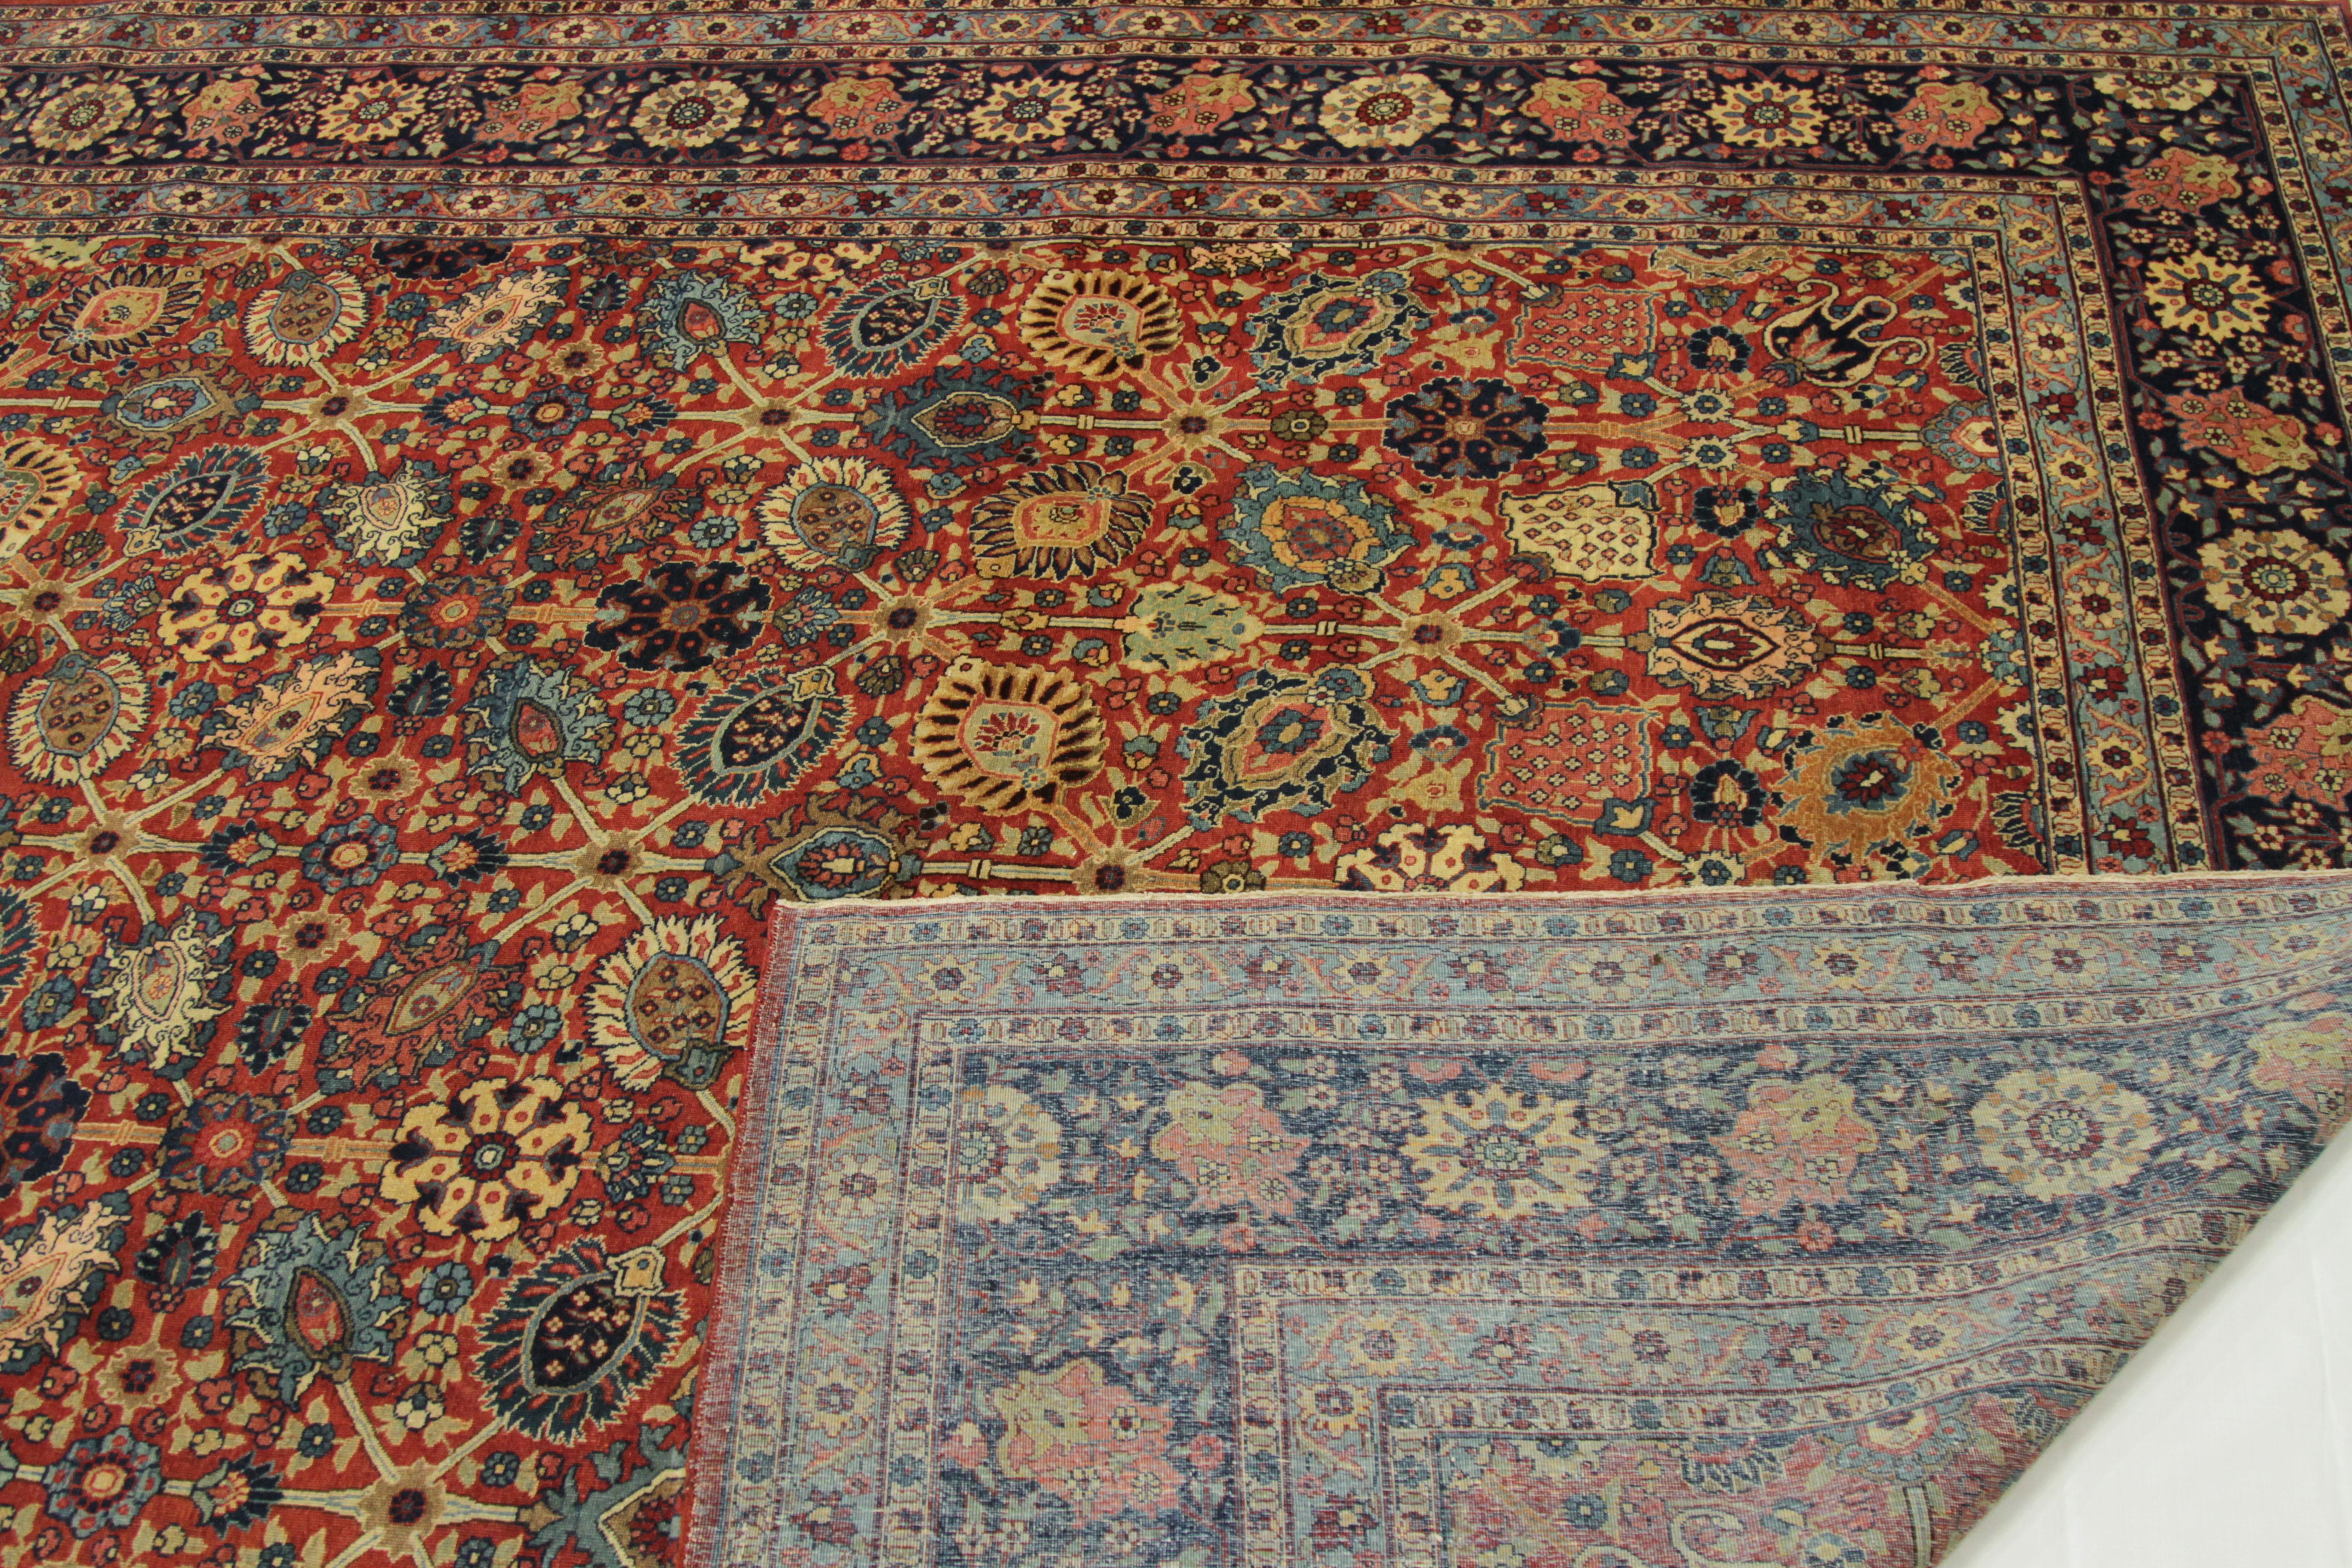 1940s Antique Persian Tabriz Rug with Jewel-Like ‘Herati’ Floral Patterns  In Excellent Condition For Sale In Dallas, TX